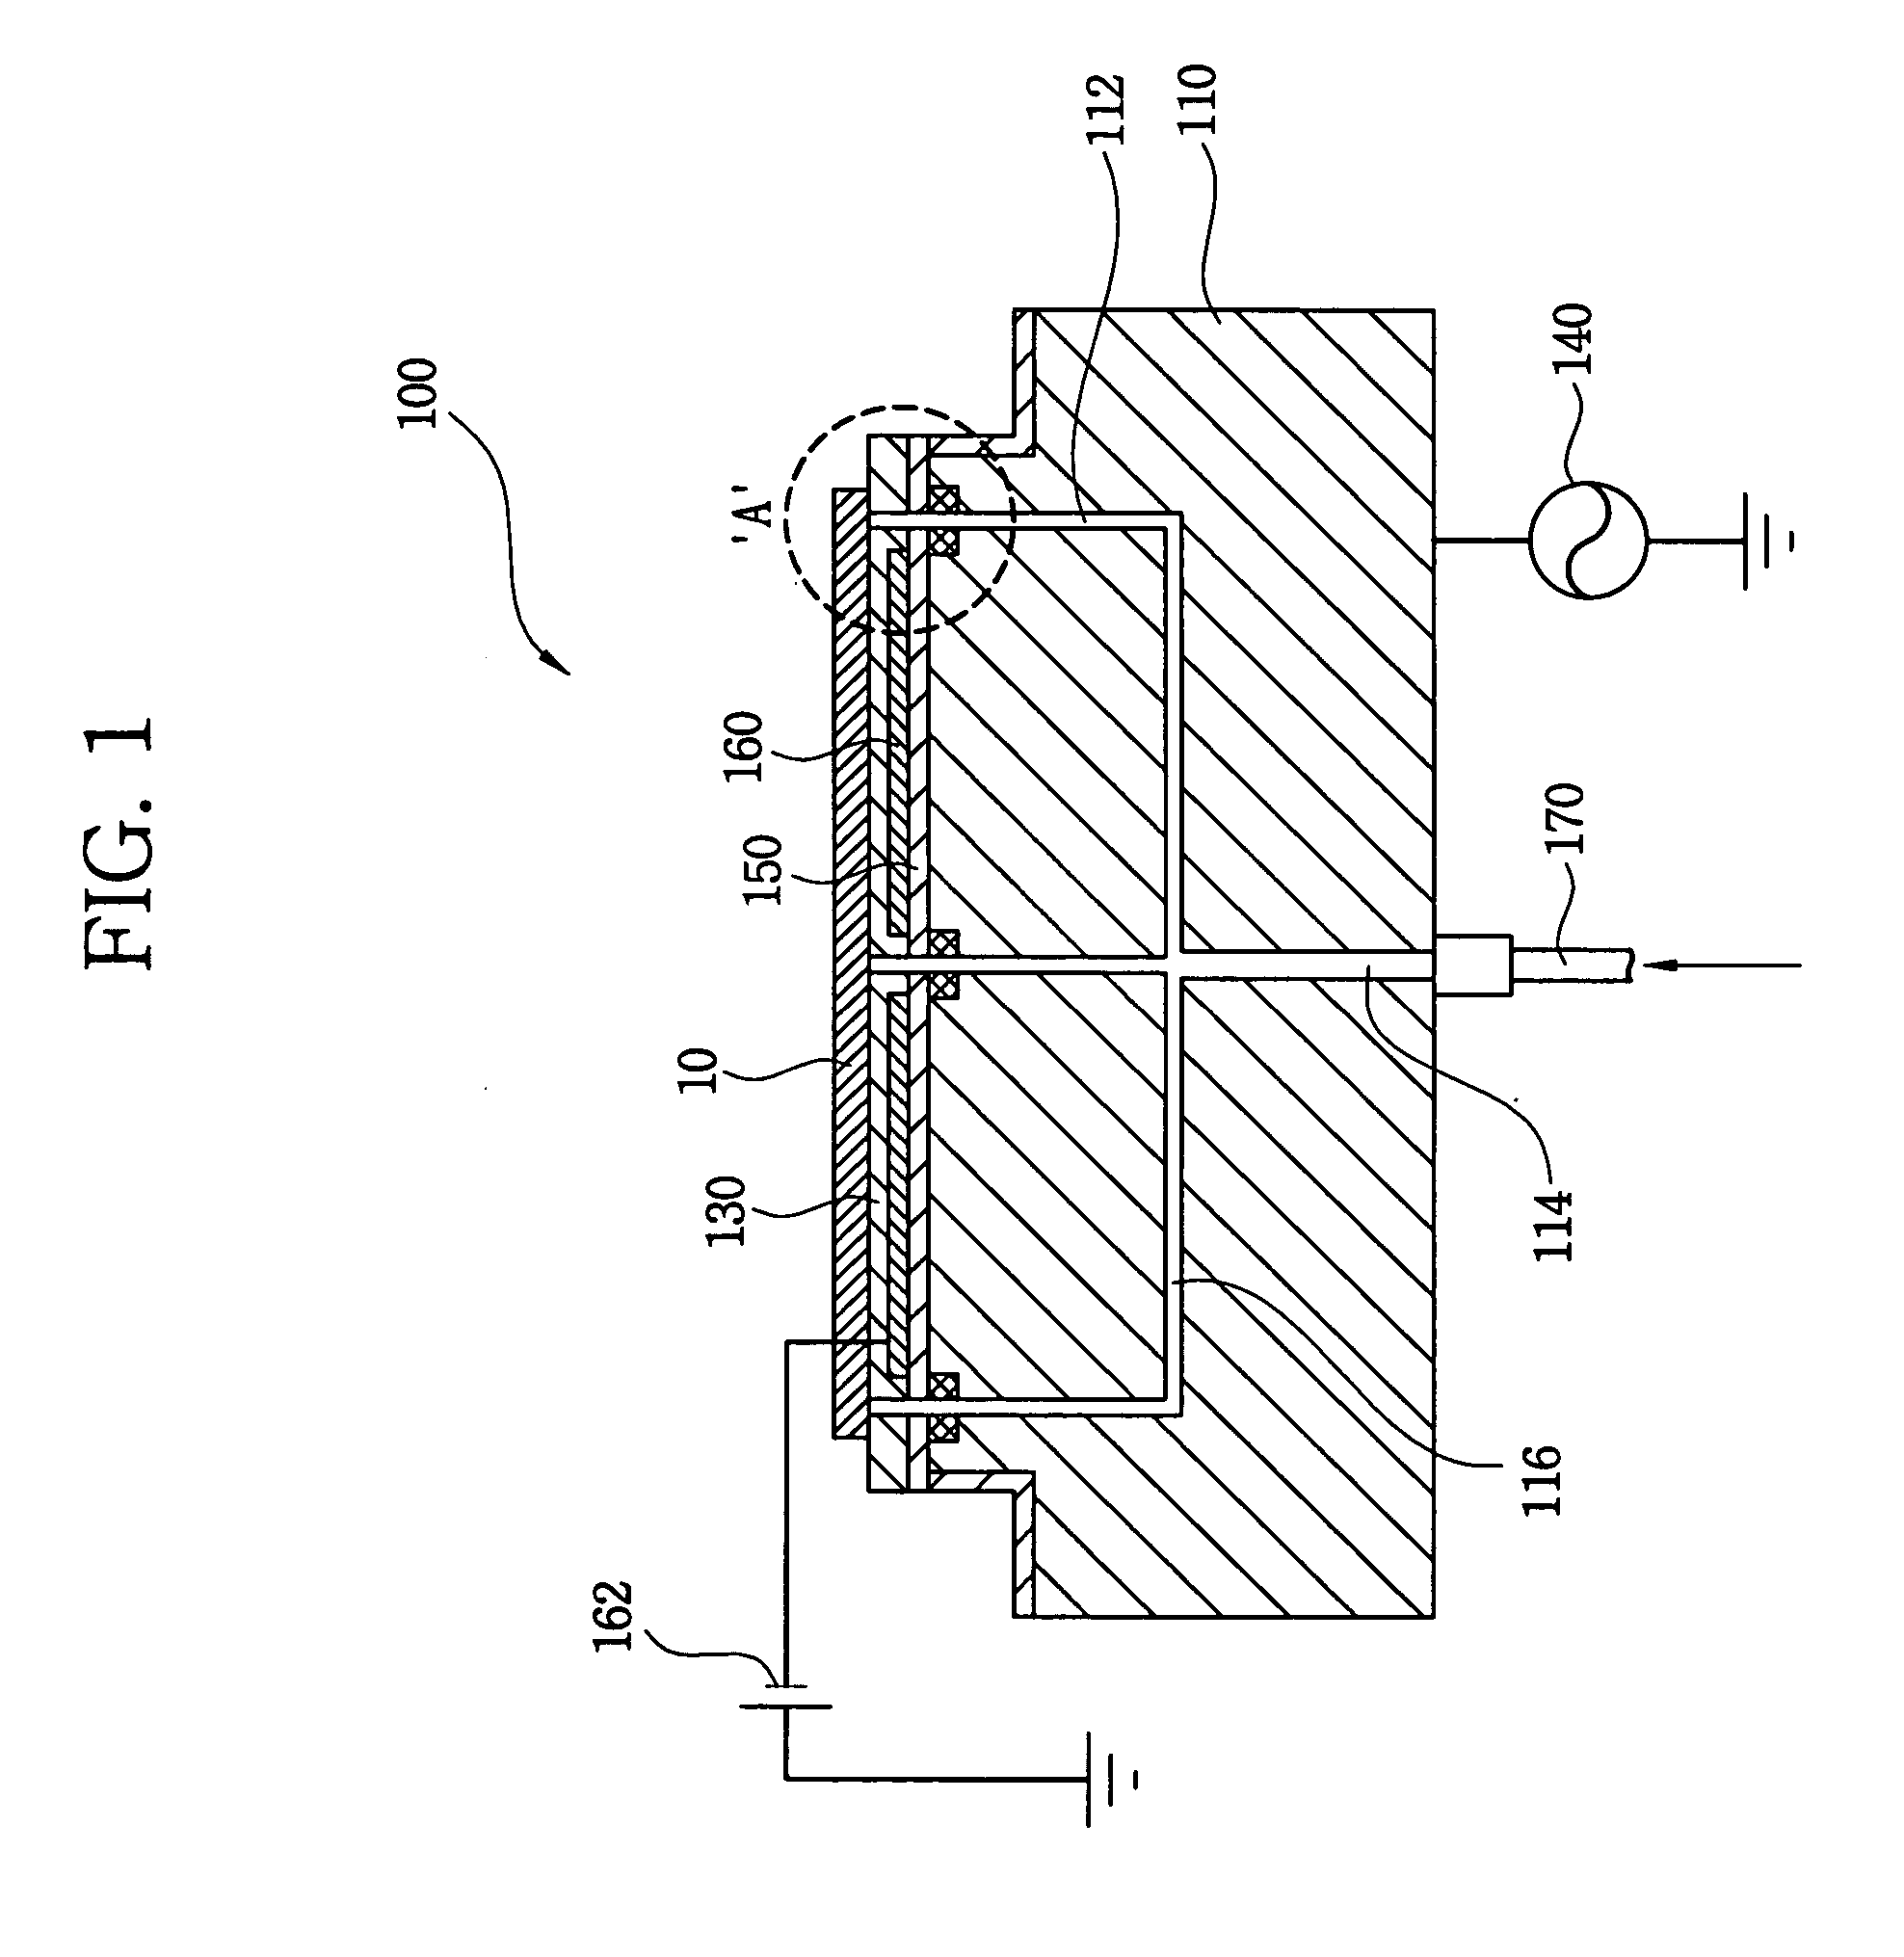 Electrostatic chuck for supporting a substrate